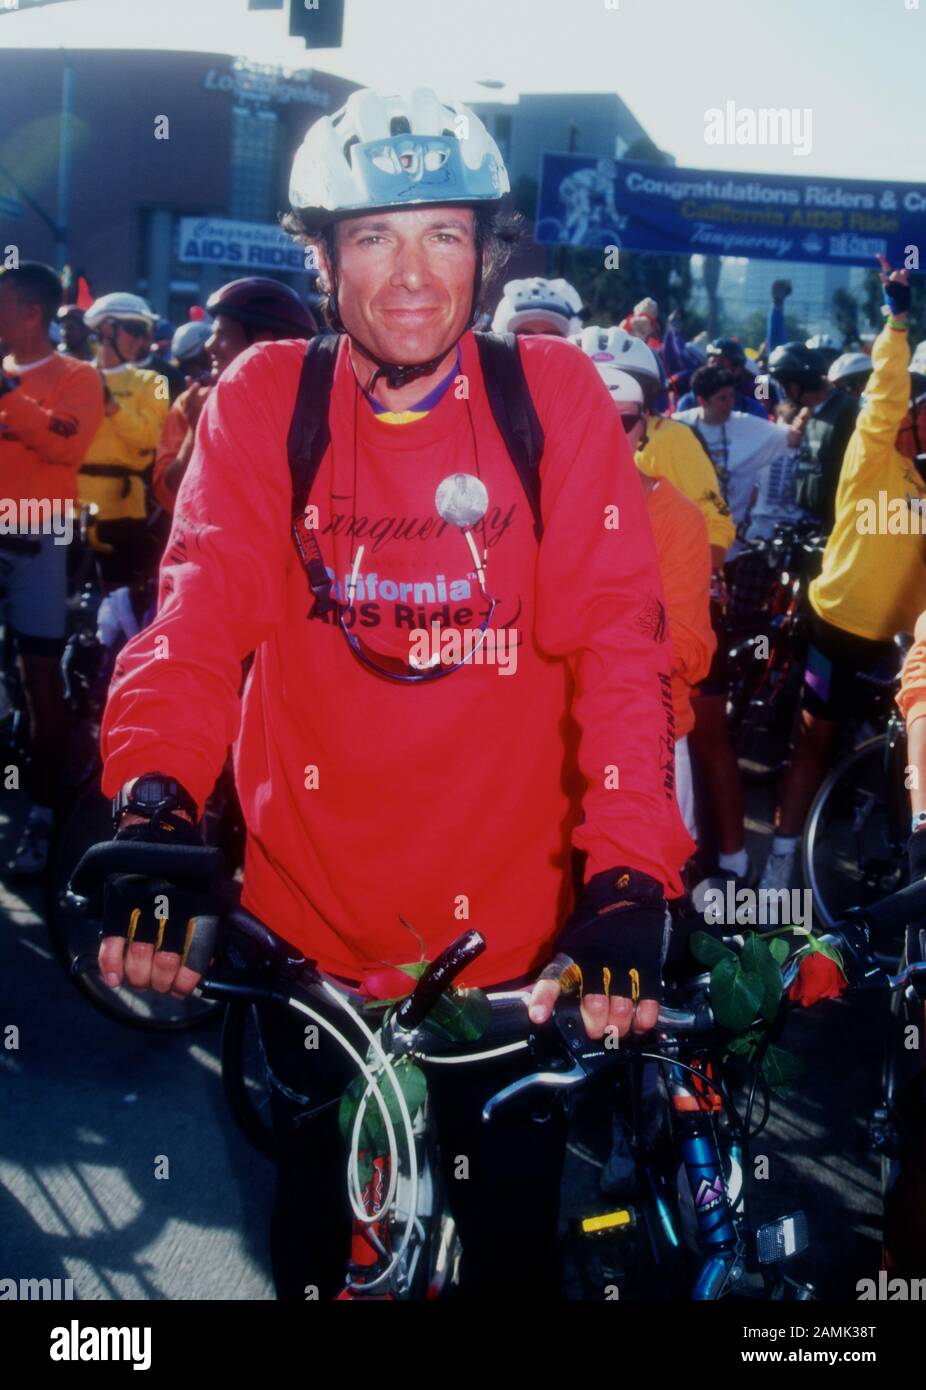 West Hollywood, California, USA 20th May 1995 Actor Robert Desiderio attends California Aids Ride on May 20, 1995 in West Hollywood, California, USA. Photo by Barry King/Alamy Stock Photo Stock Photo